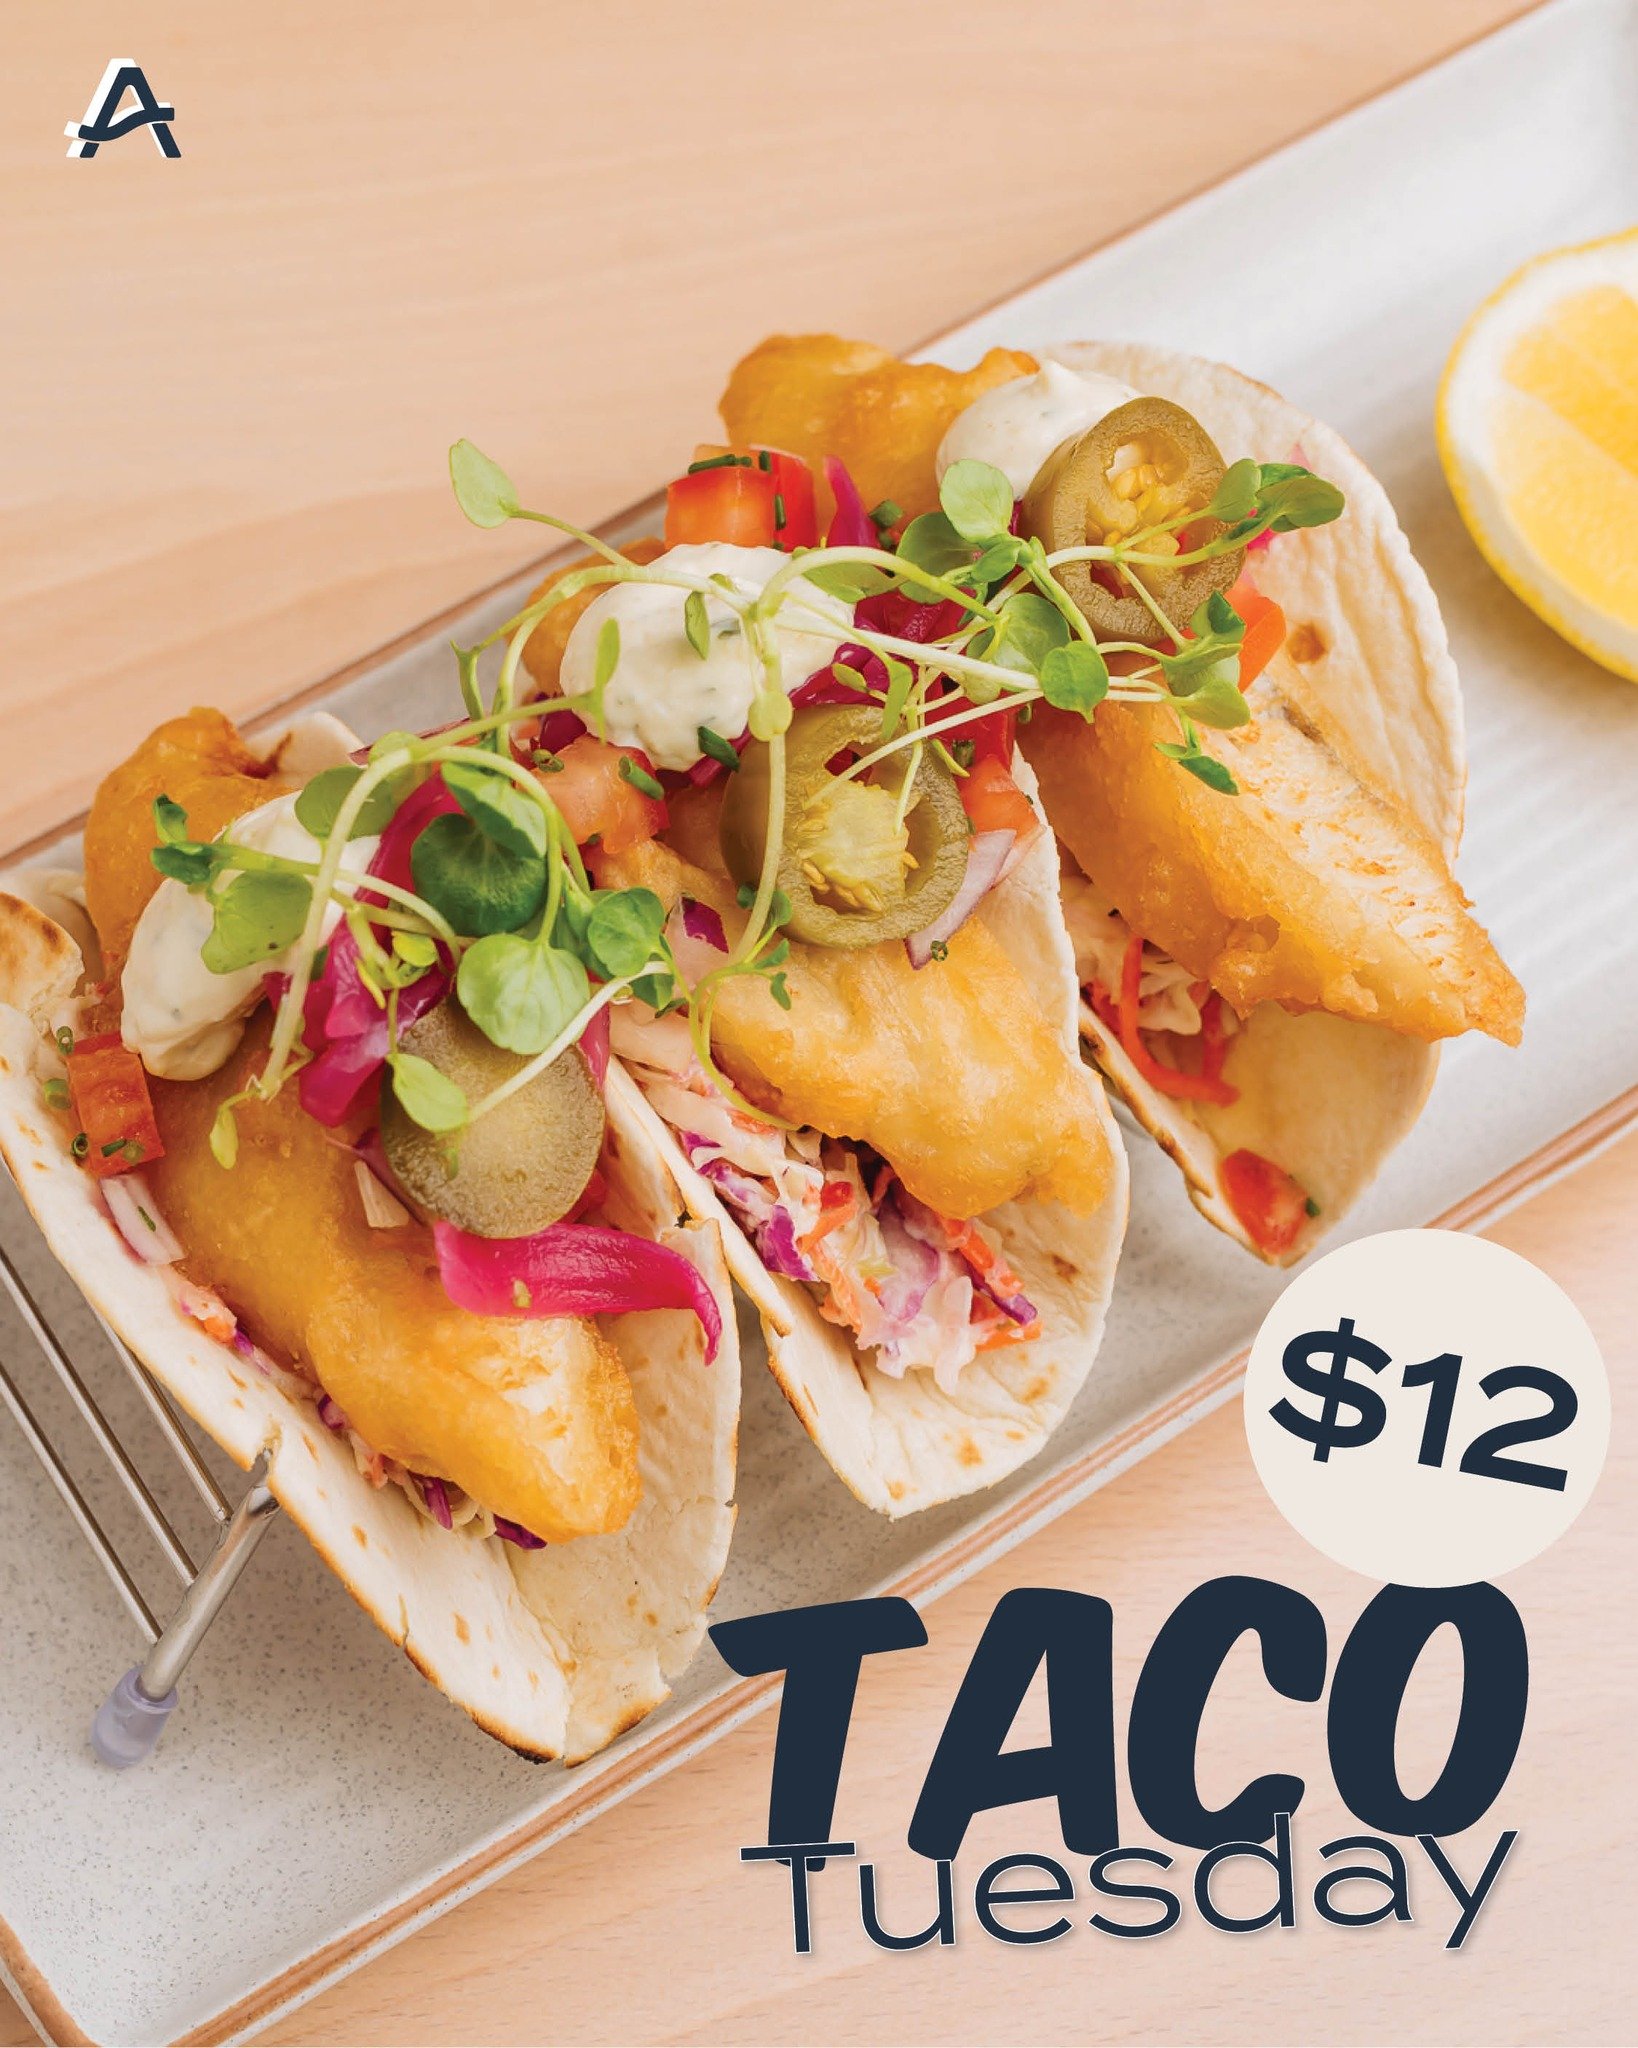 Let&rsquo;s Taco Bout it! 🌮

Head into Ashmore Tavern for Taco Tuesday, where you can enjoy three pork, chicken or fish tacos for only $12! 🔥

Available every Tuesday from 11:30am to 8:30pm.

Book a table 📲 https://bit.ly/47BzliY

#TacoTuesday #As